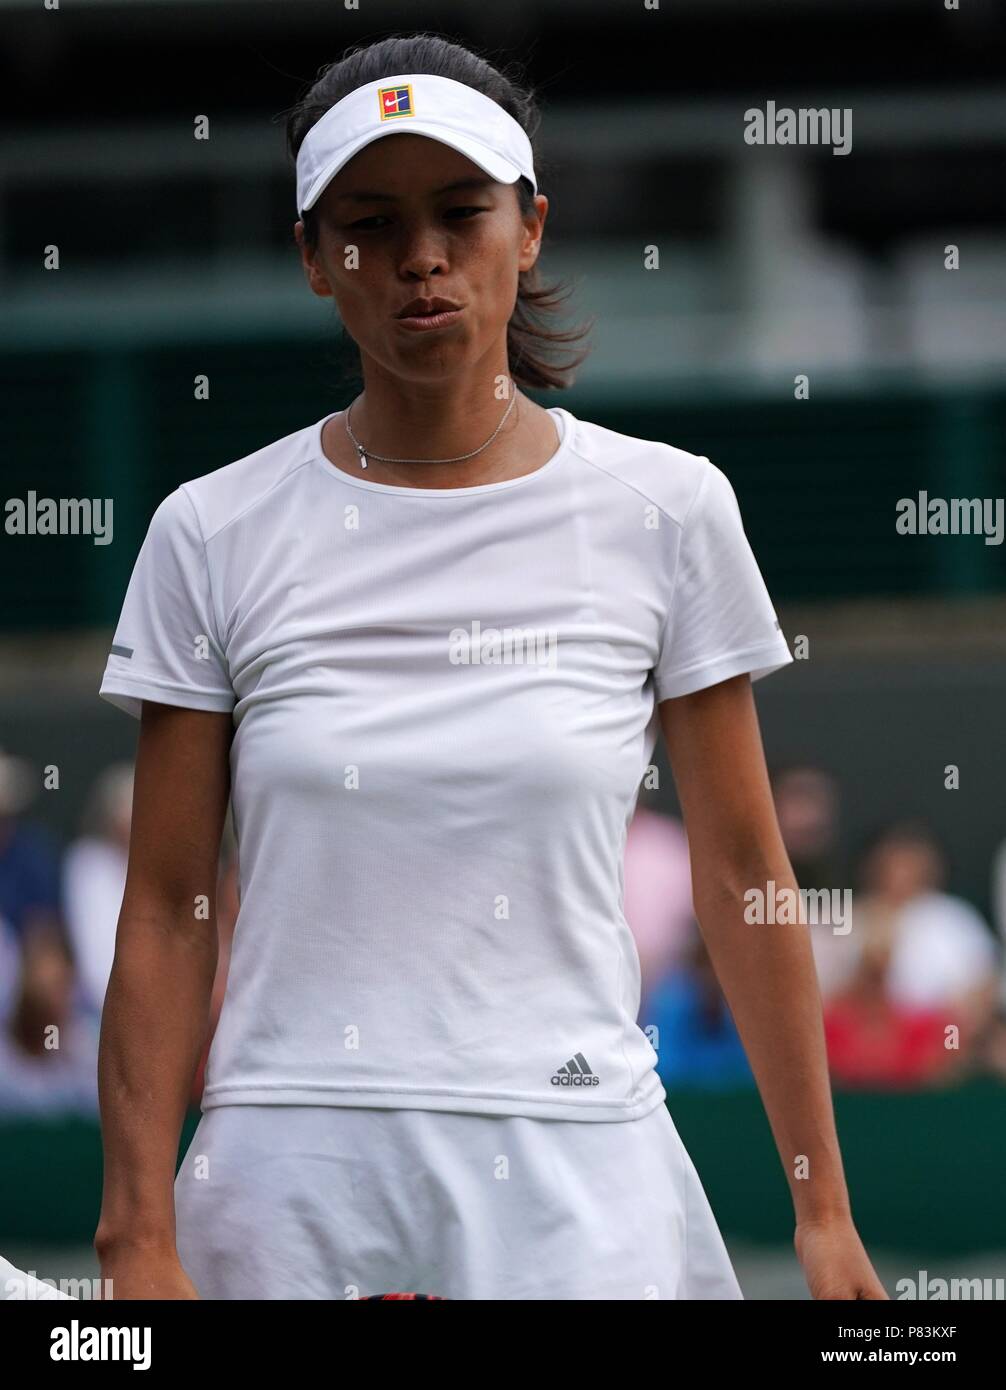 London, Britain. 9th July, 2018. Hsieh Su-Wei of Chinese Taipei reacts  during the women's singles fourth round match against Dominika Cibulkova of  Slovakia at the Wimbledon Championships 2018 in London, Britain, July